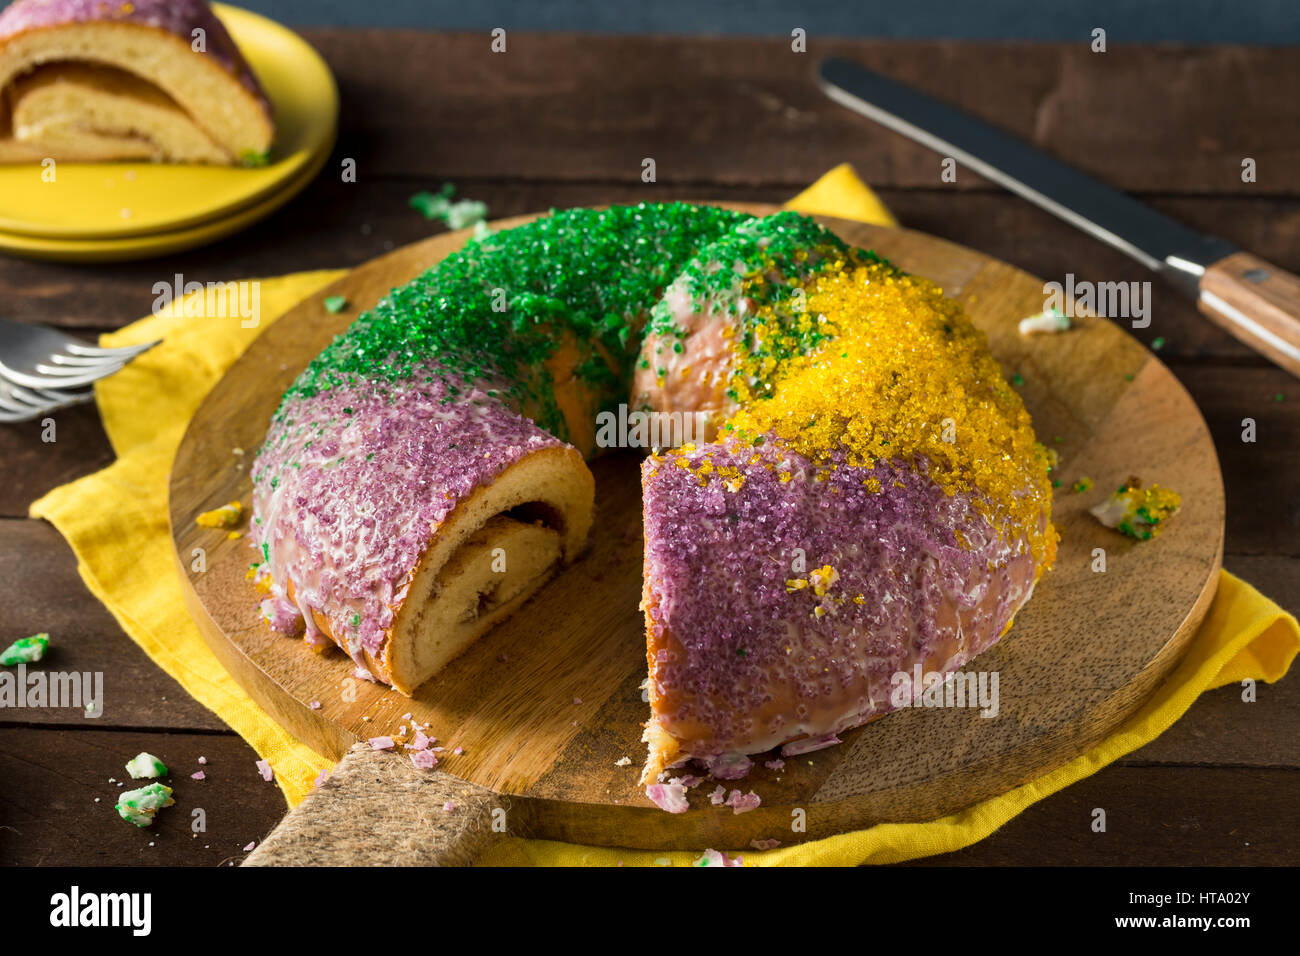 Homemade Colorful Mardi Gras King Cake for Fat Tuesday Stock Photo